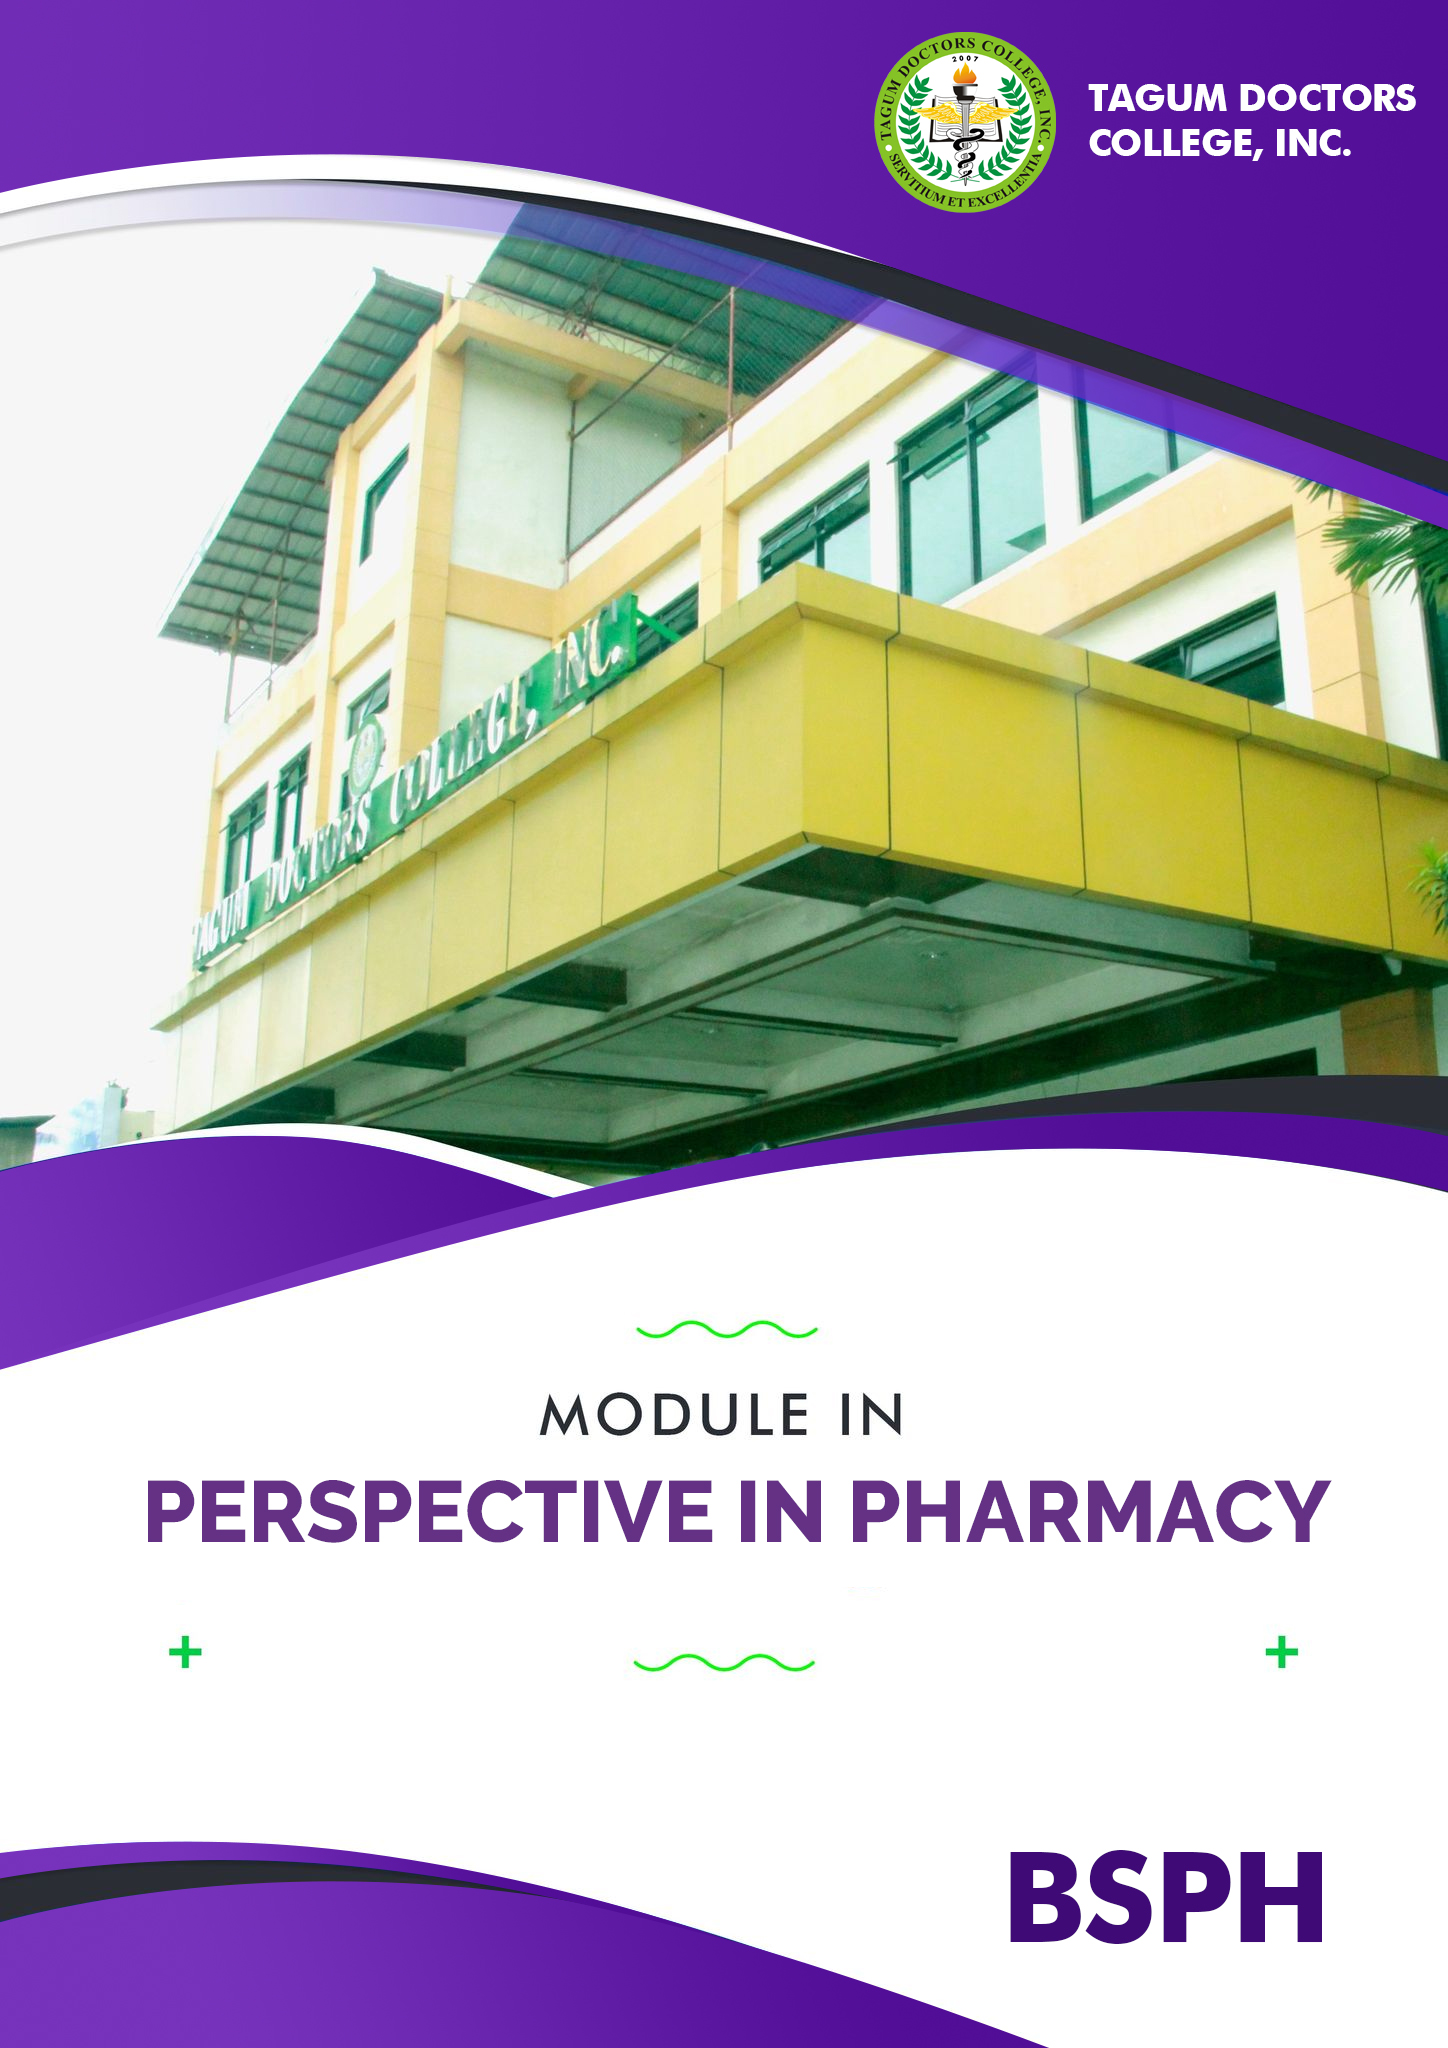 Perspectives in Pharmacy - BSPh 1B